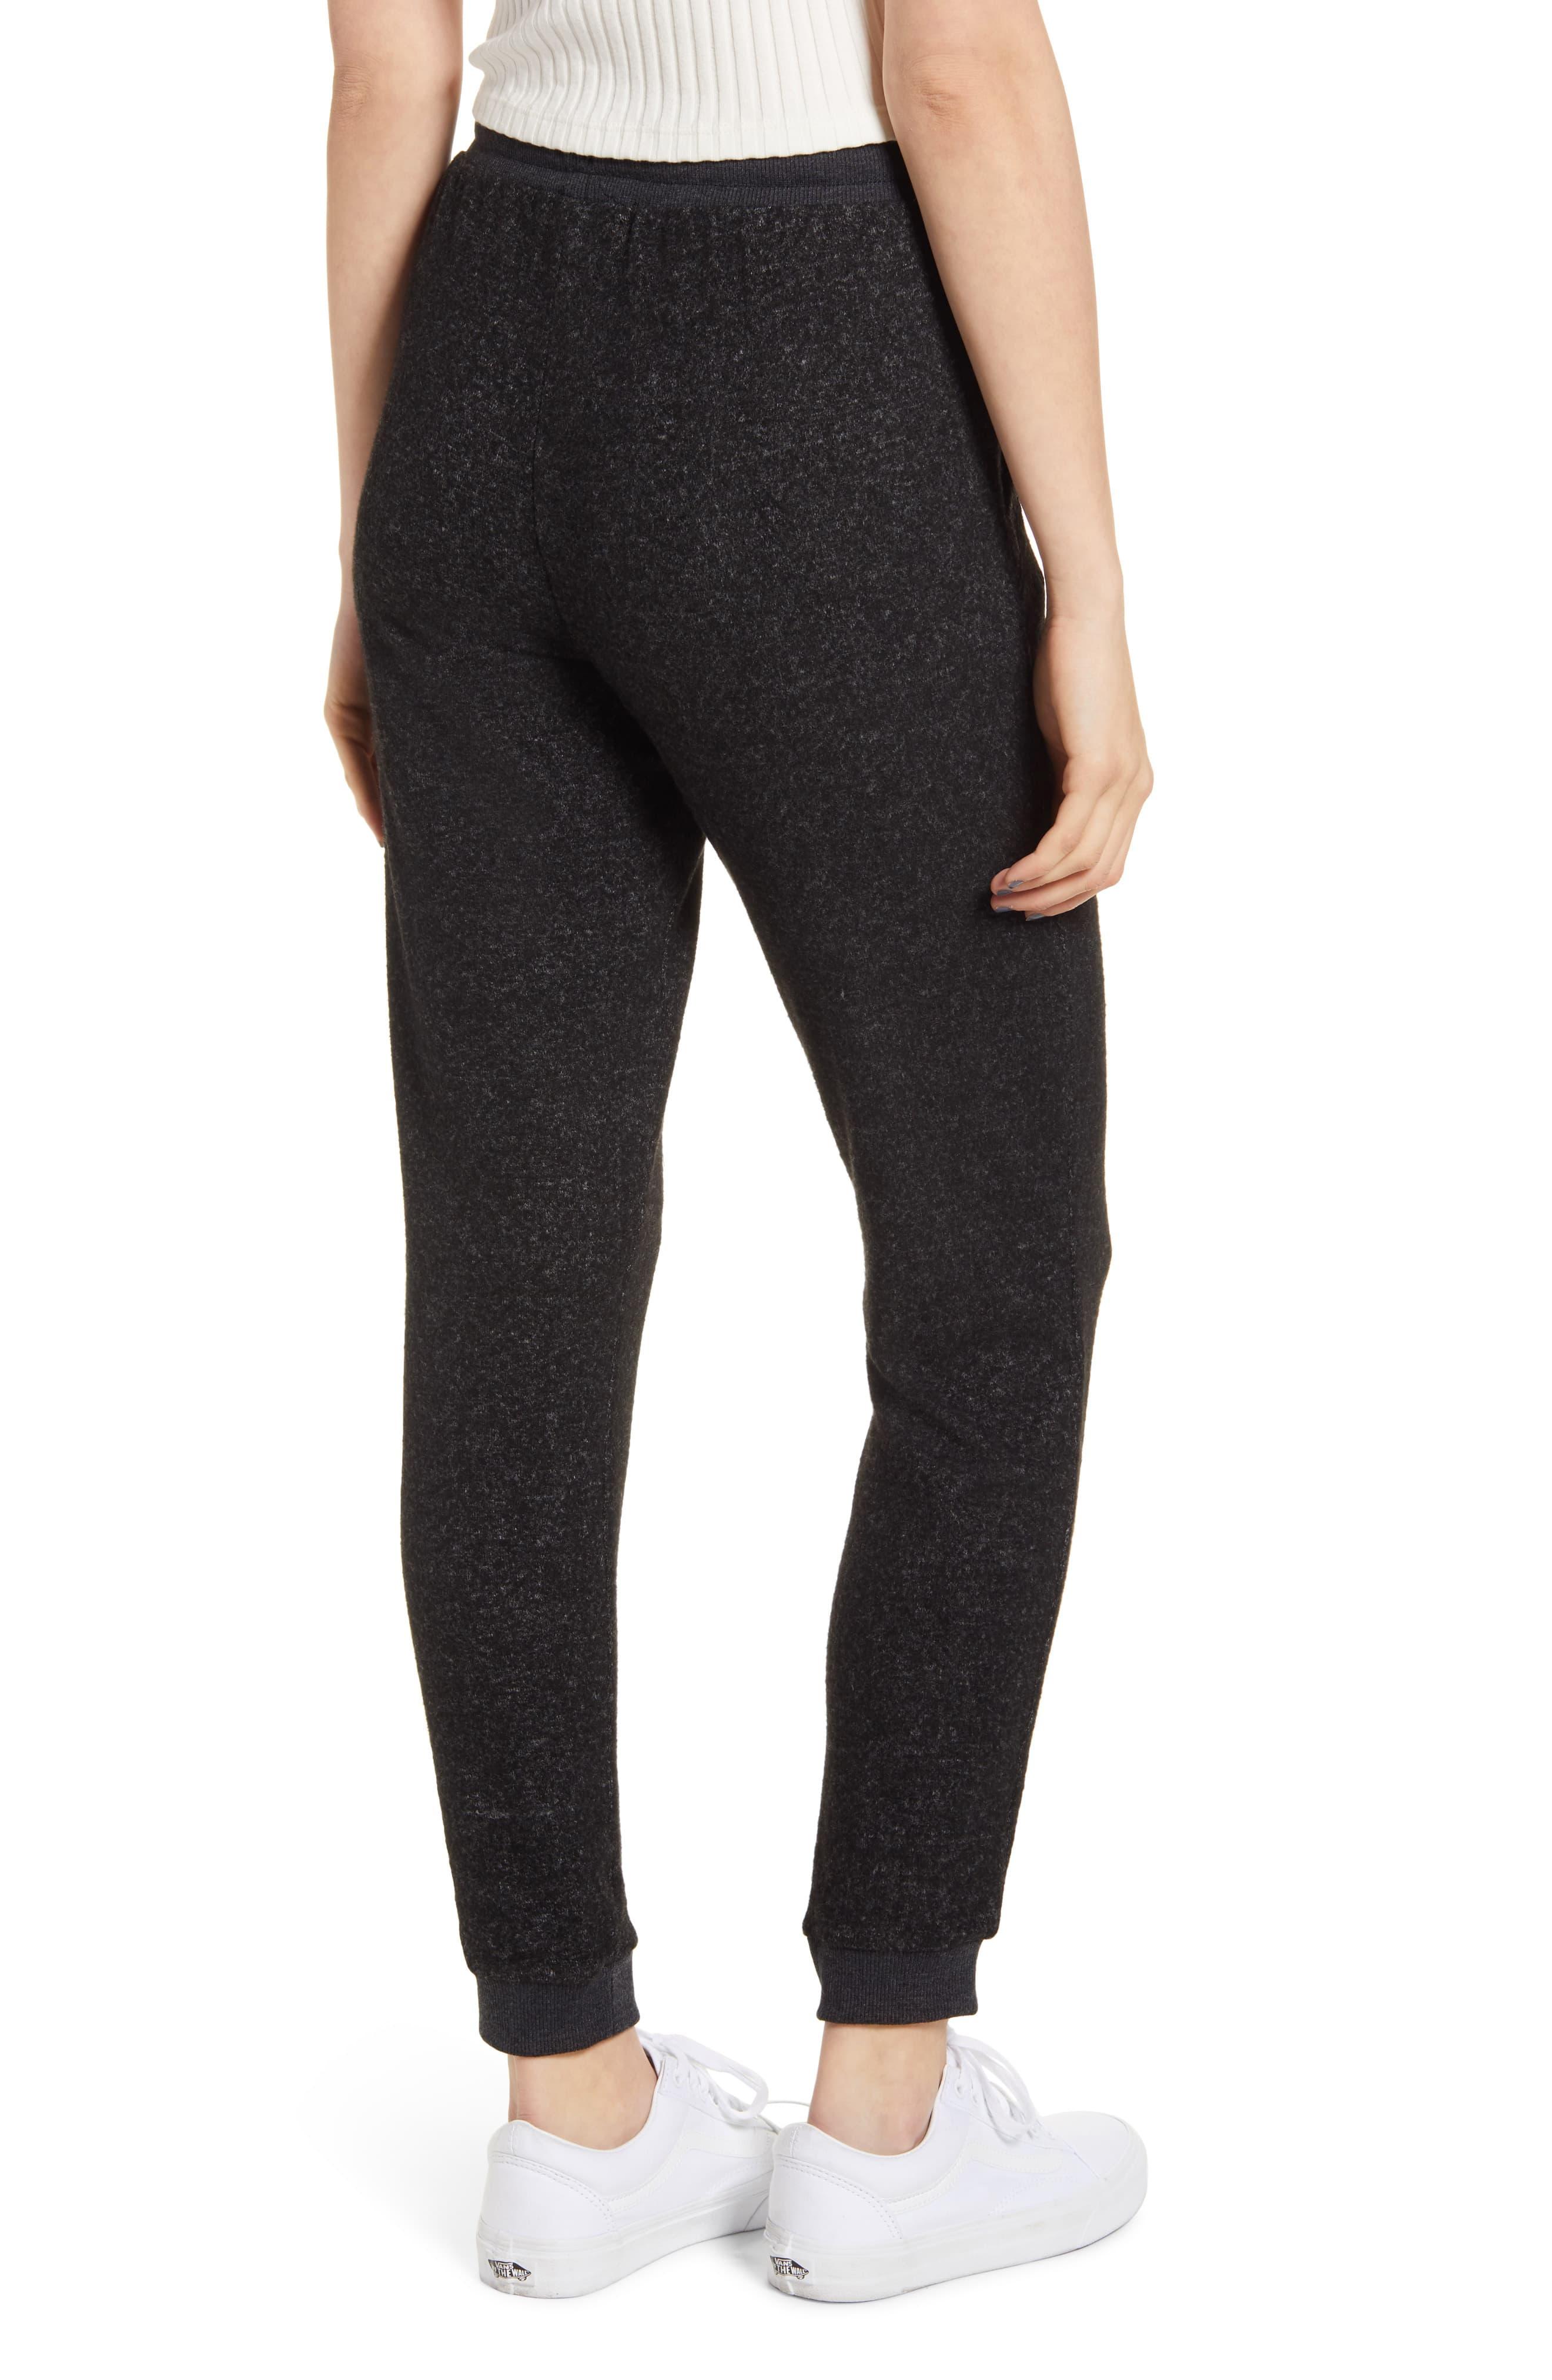 Rip Curl Cozy Jogger Pants in Black Heather (Black) - Lyst